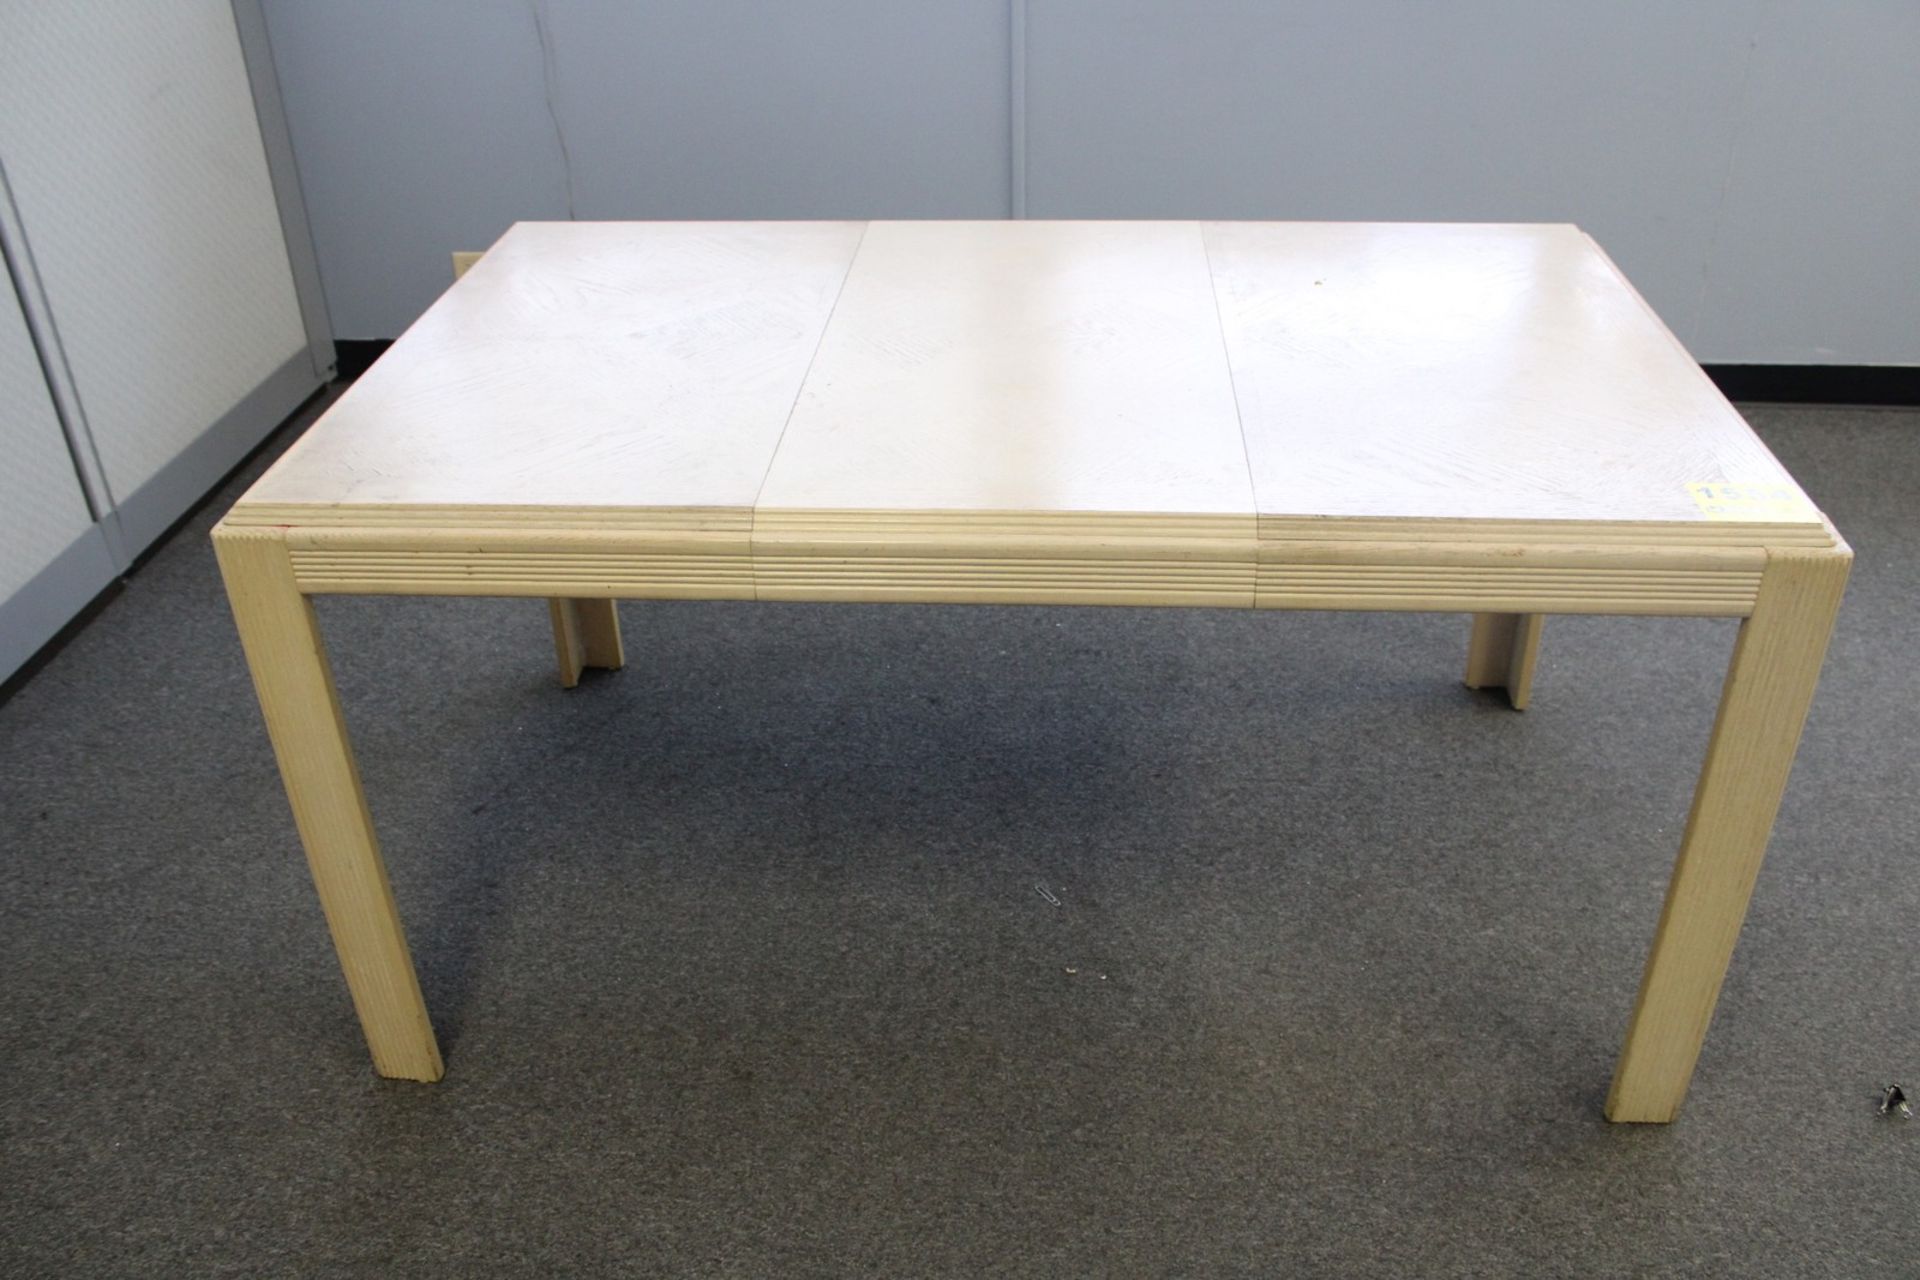 60" X 36" X 30" TABLE, WITH LEAF